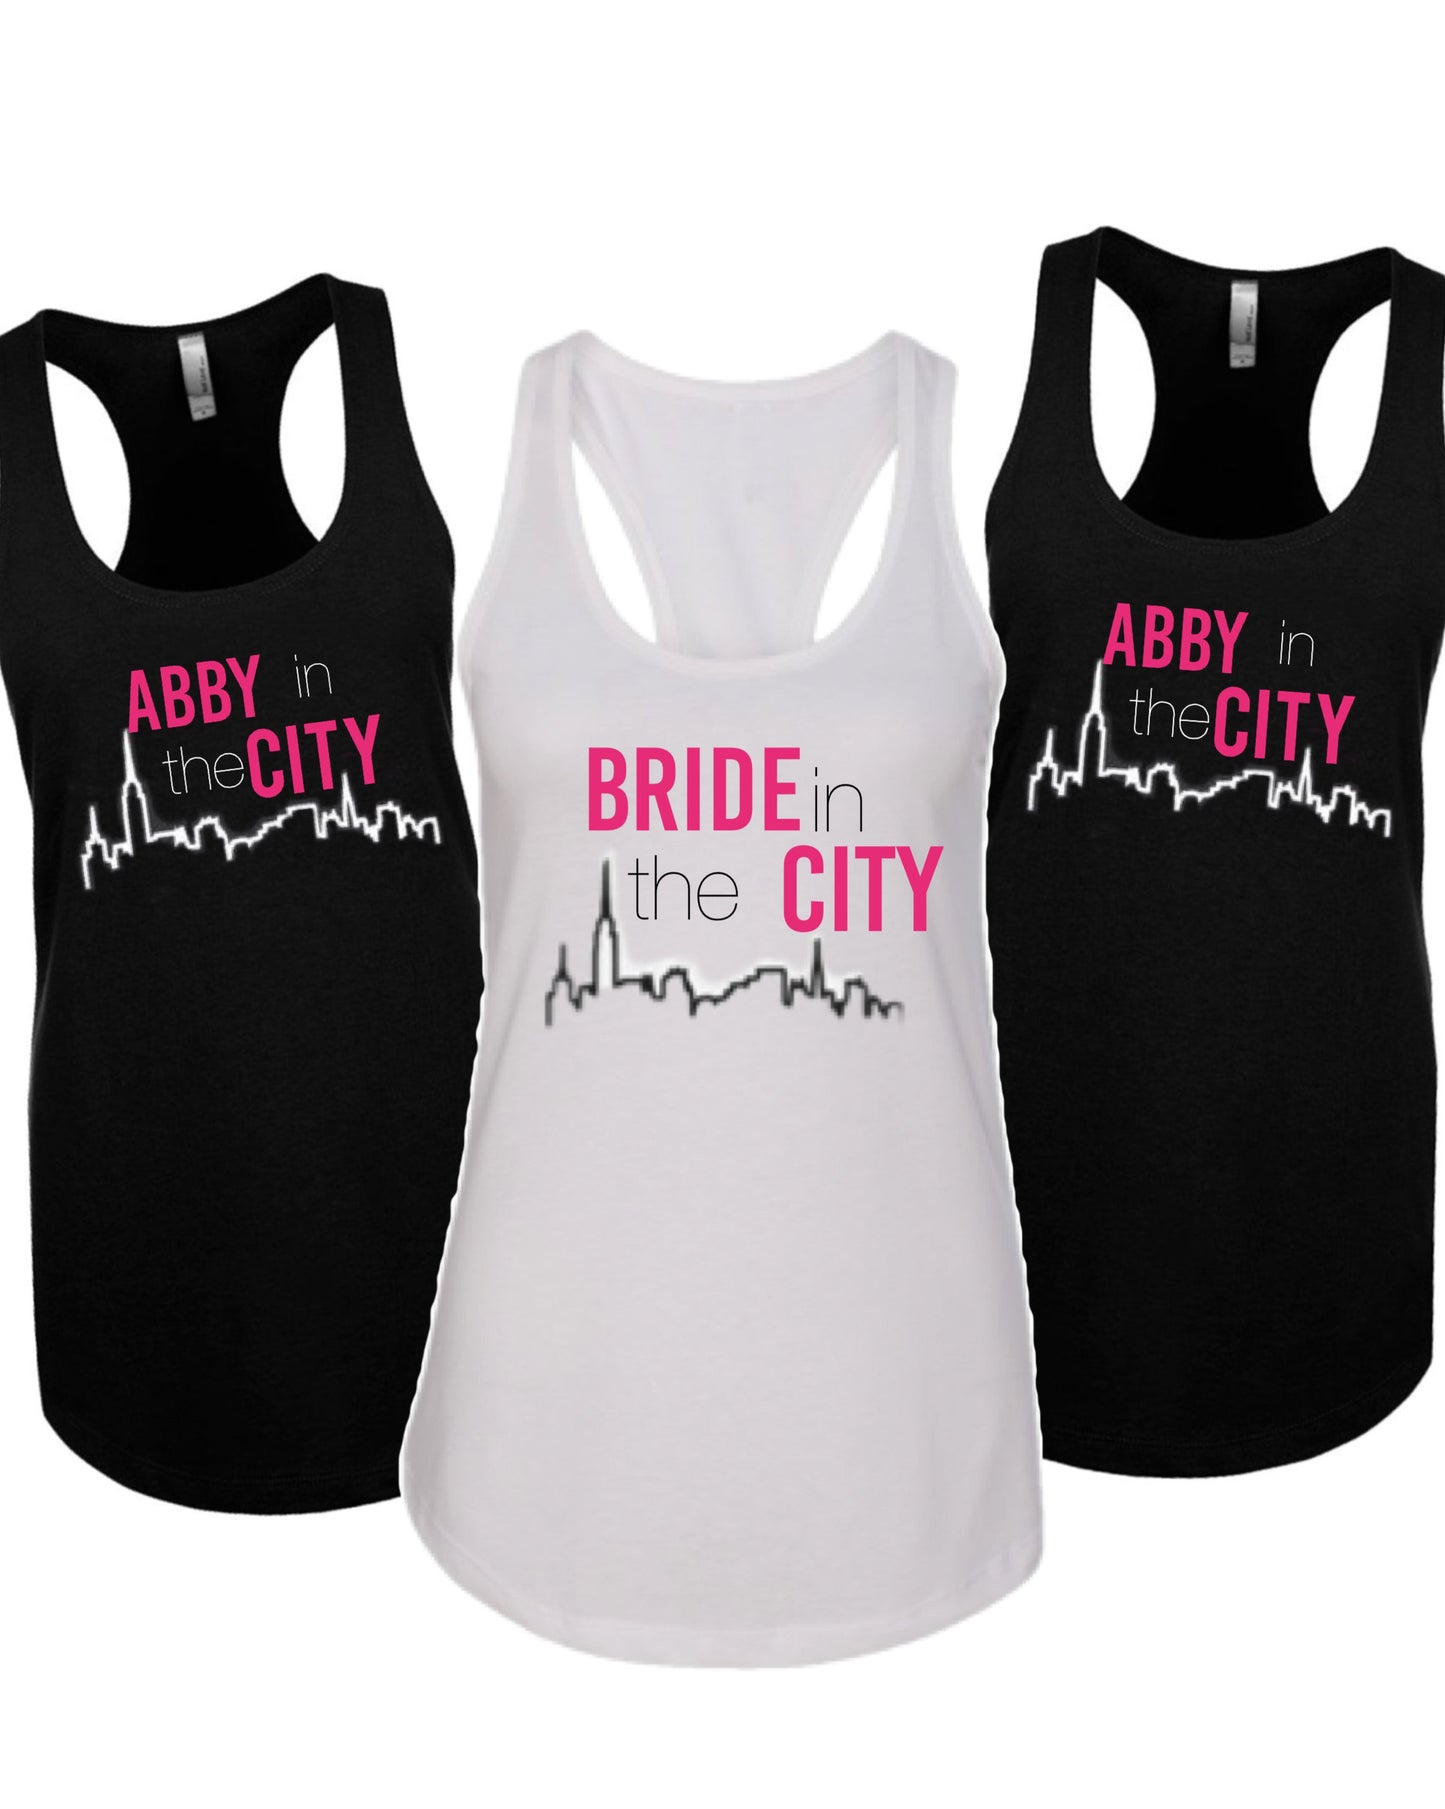 Bride in the city shirt, Sex in the city theme shirt  bride and co shirts, bridesmaid shirts, bachelorette weekend, bride shirt, gift for he